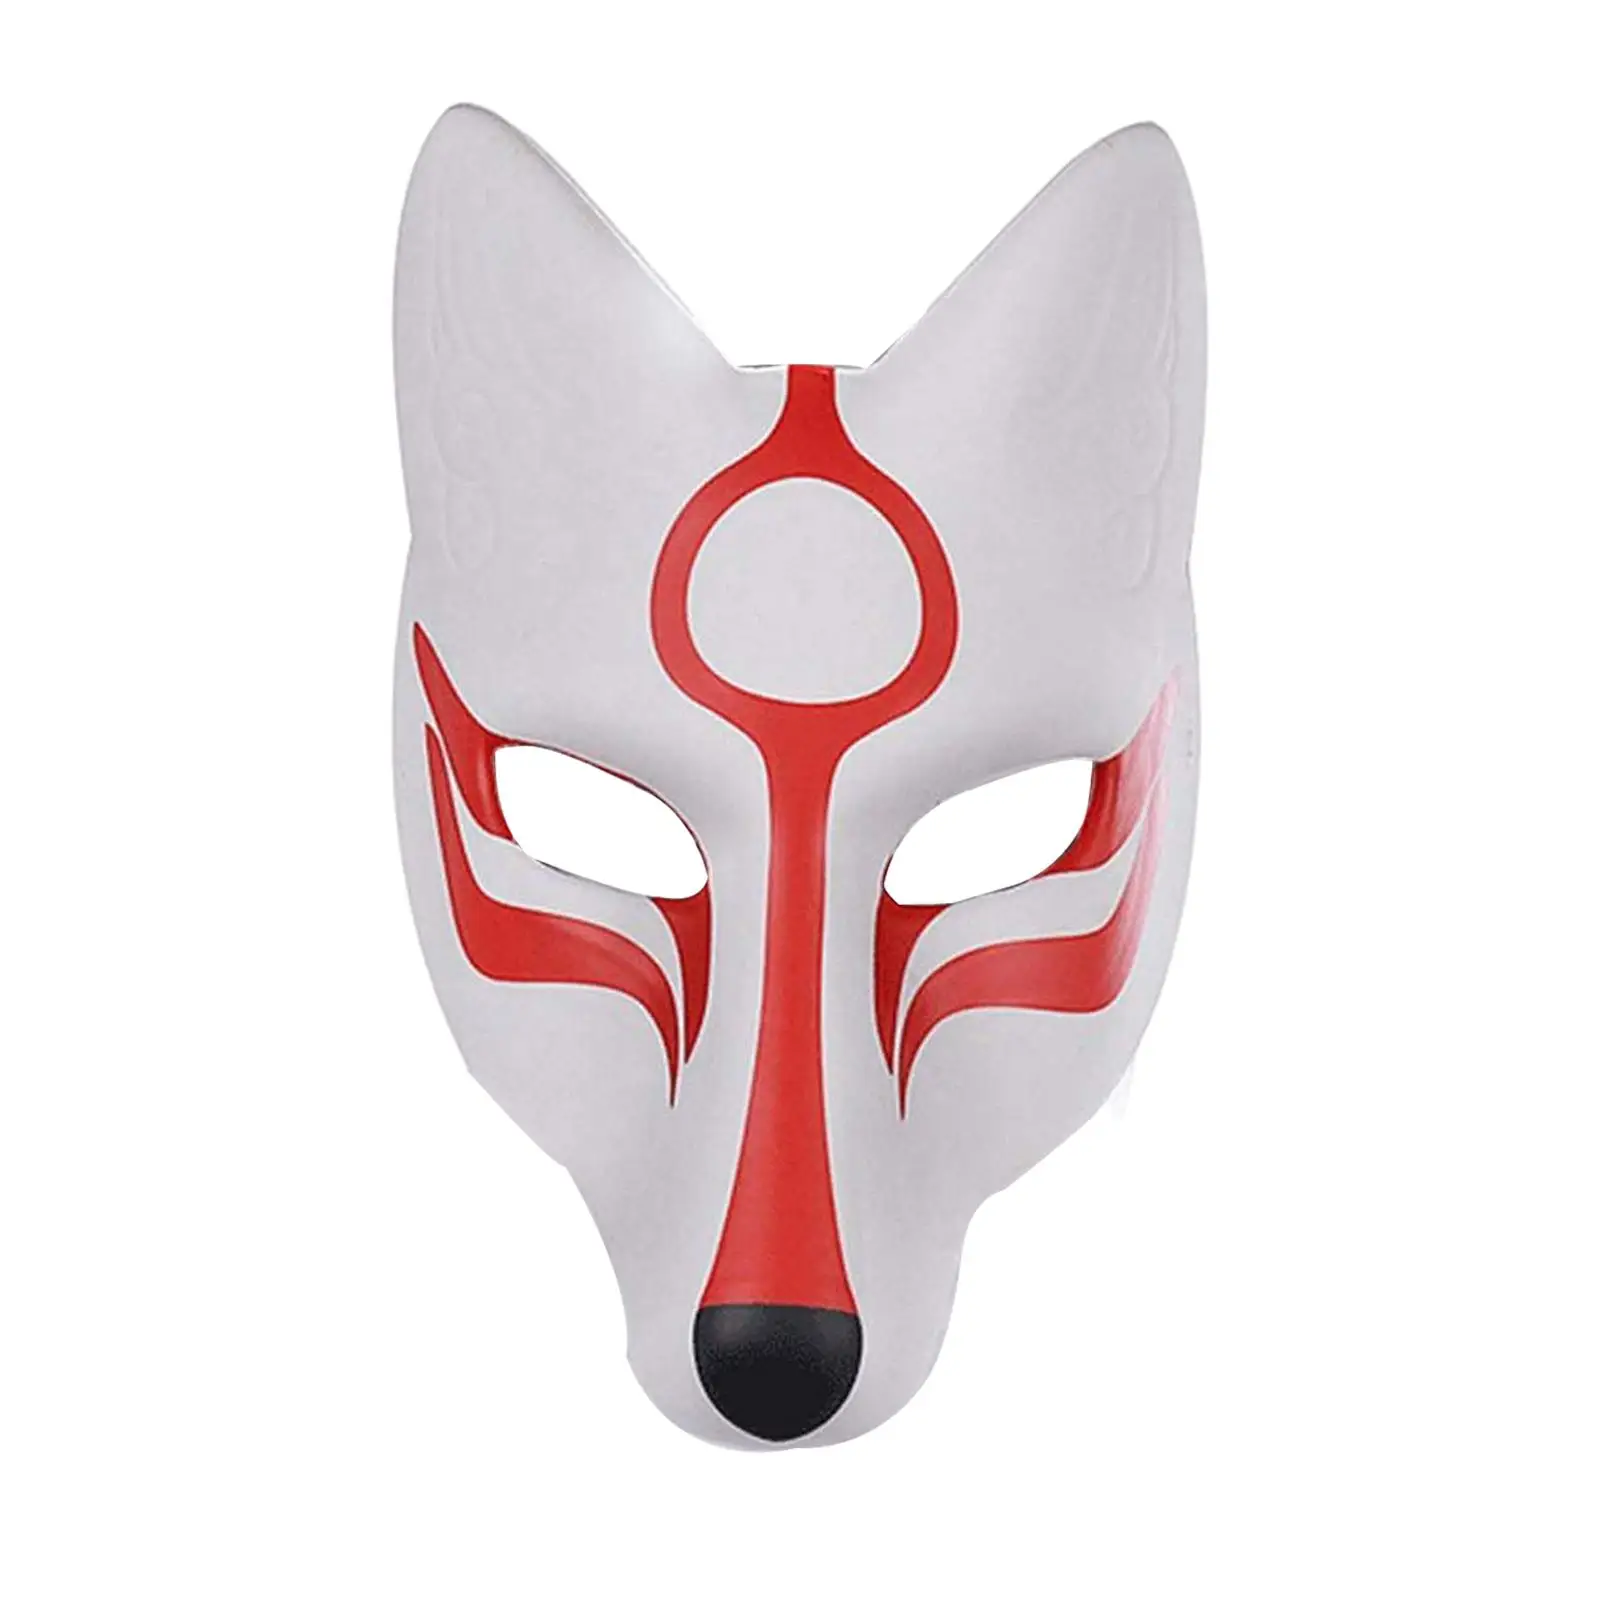 Japanese Anime Masks Halloween Cosplay Mask Mysterious Comfortable wearing